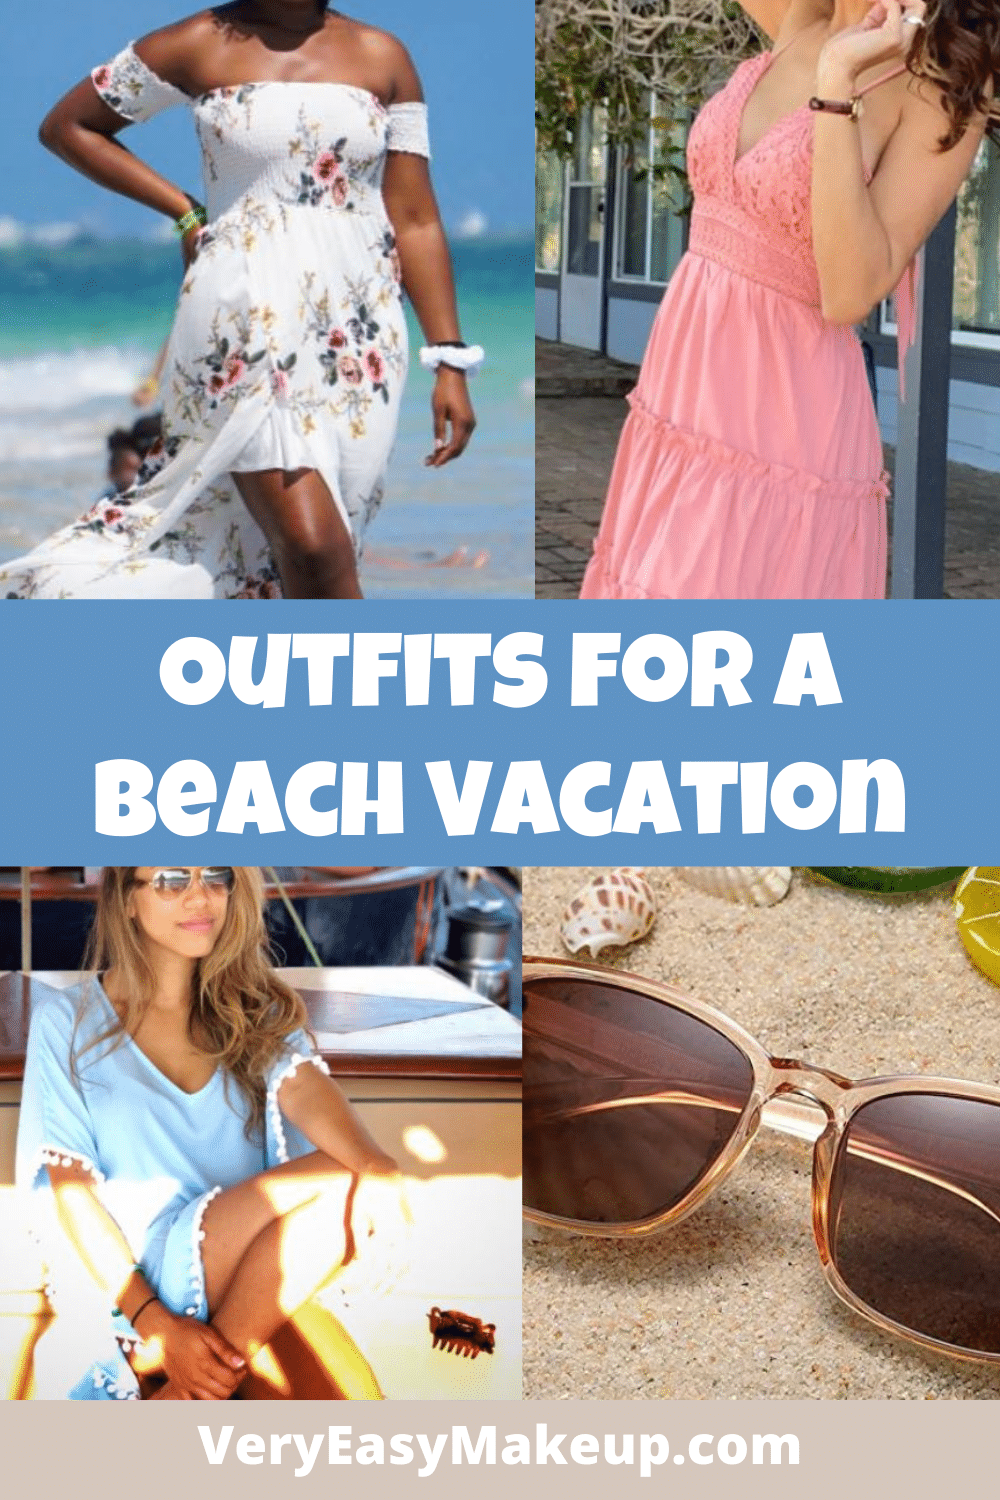 Outfits for a Beach Vacation on Amazon by Very Easy Makeup